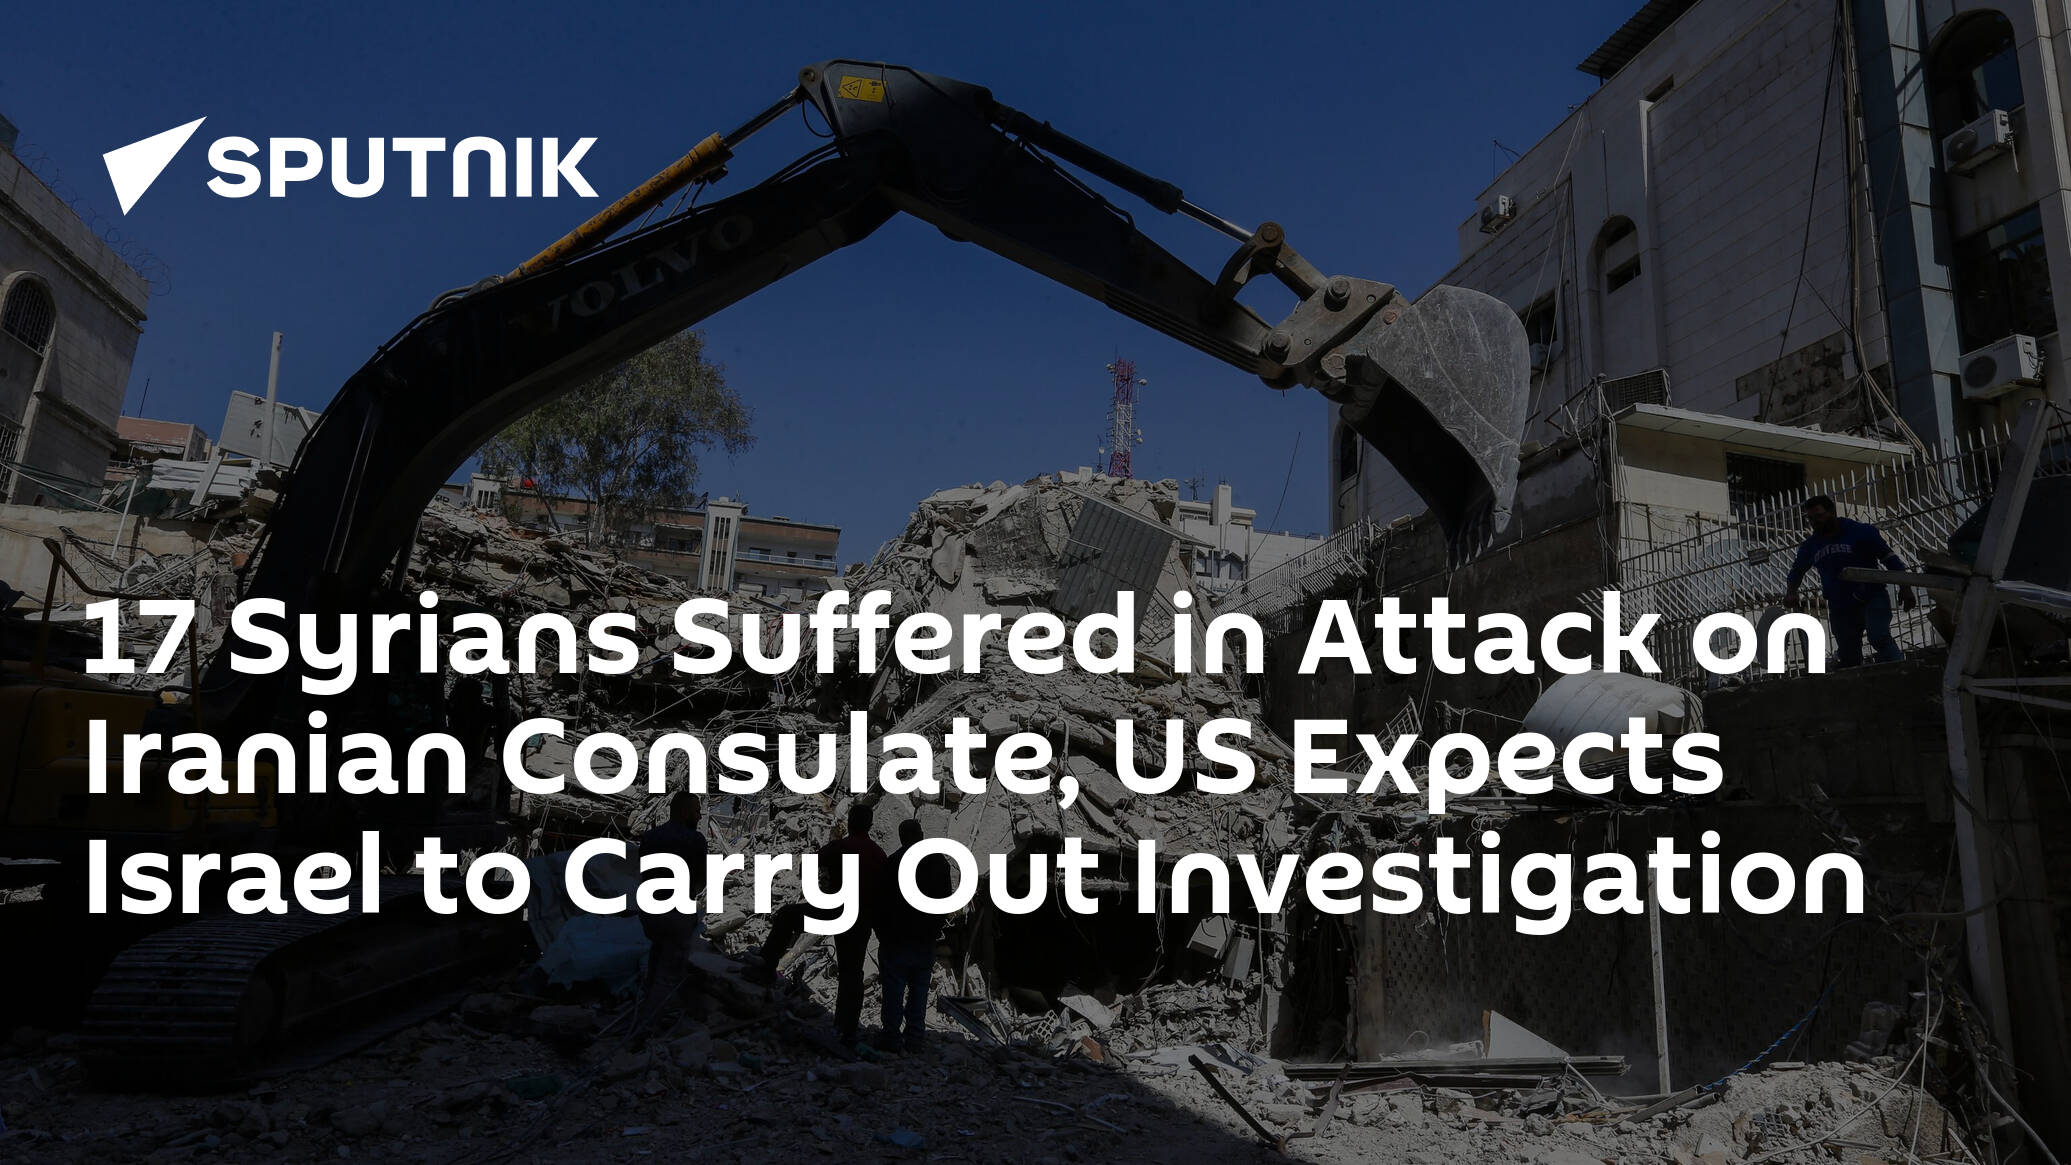 17 Syrians Suffered in Attack on Iranian Consulate, US Expects Israel to Carry Out Investigation